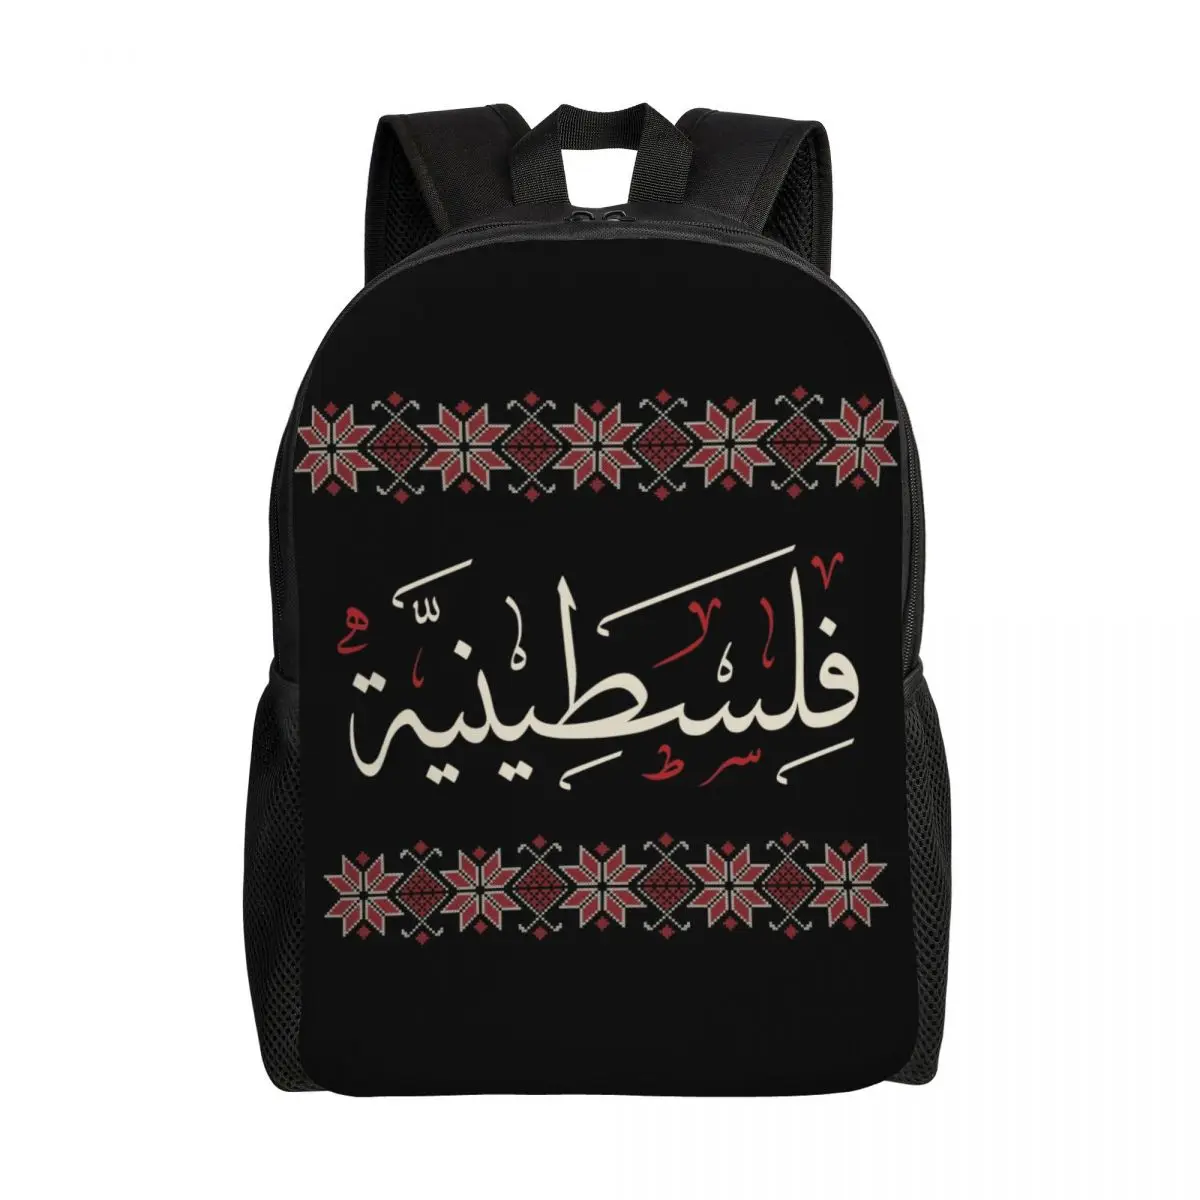 

Palestine Arabic Calligraphy With Tatreez Embroidery Backpacks Texture College School Travel Bags Bookbag Fits 15 Inch Laptop